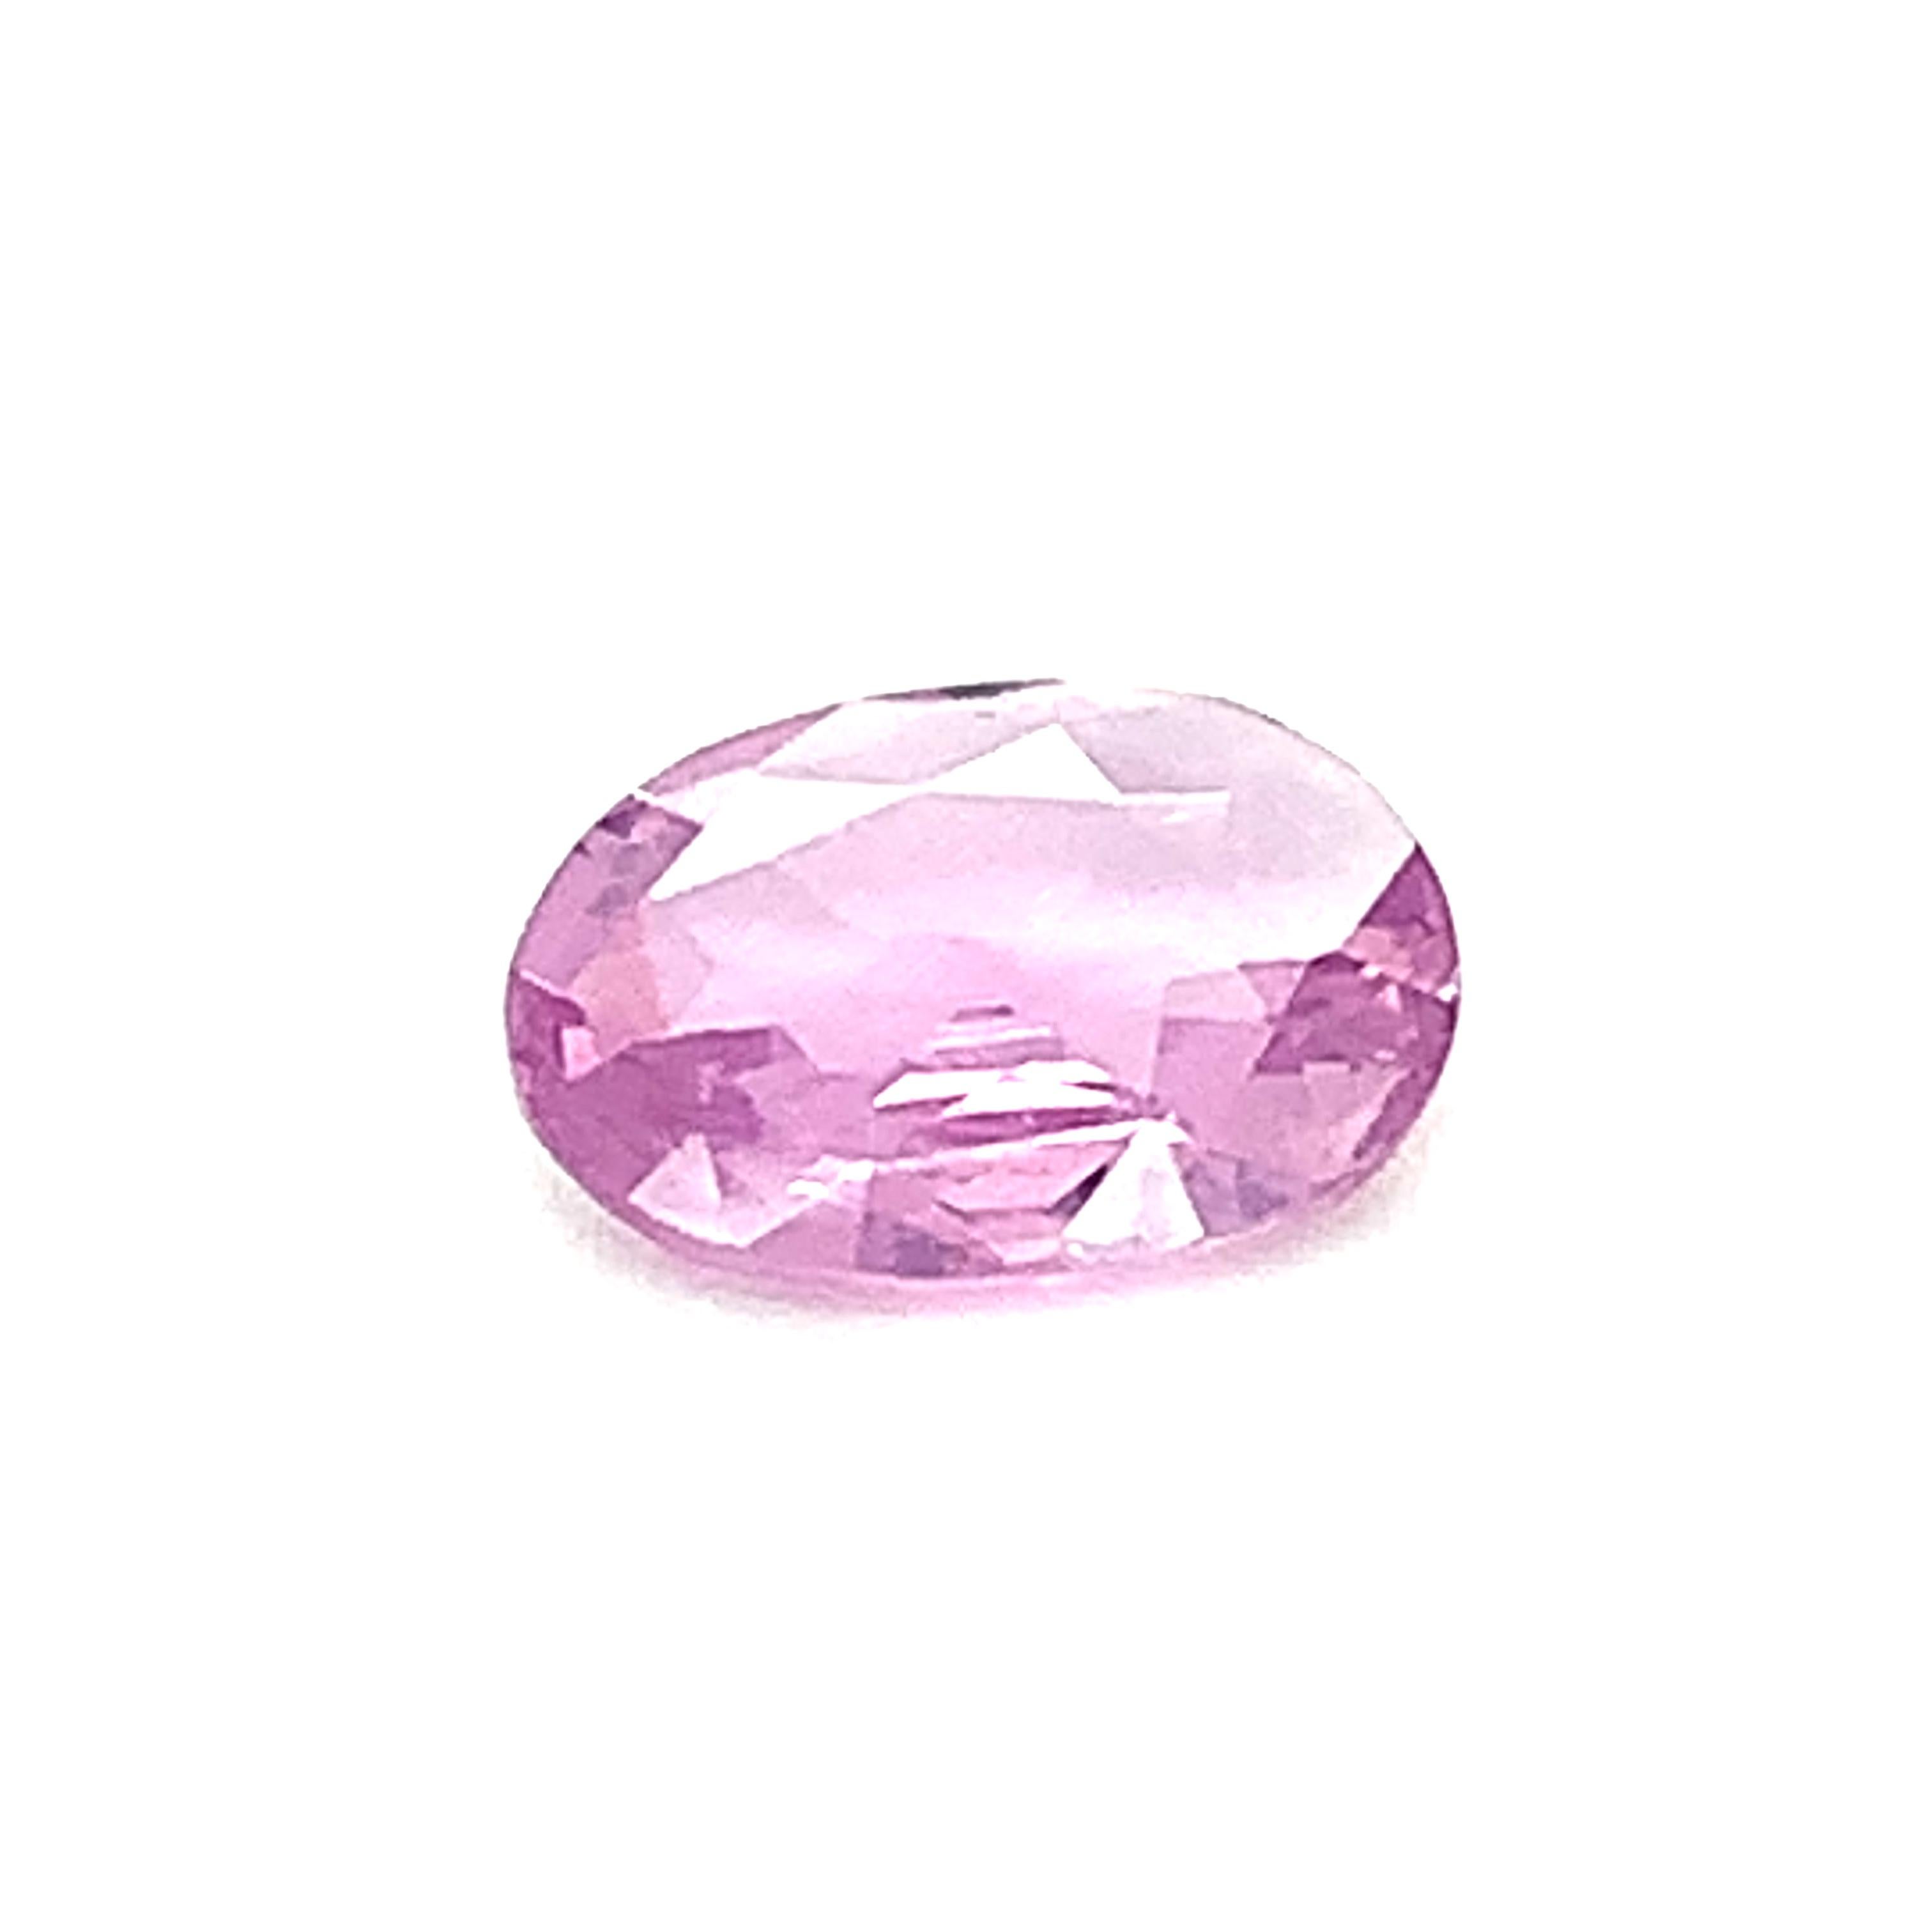 Artisan 2.95 Ct. Pink Sapphire Oval GIA, Unset 3-Stone Engagement Ring or Pendant Gem